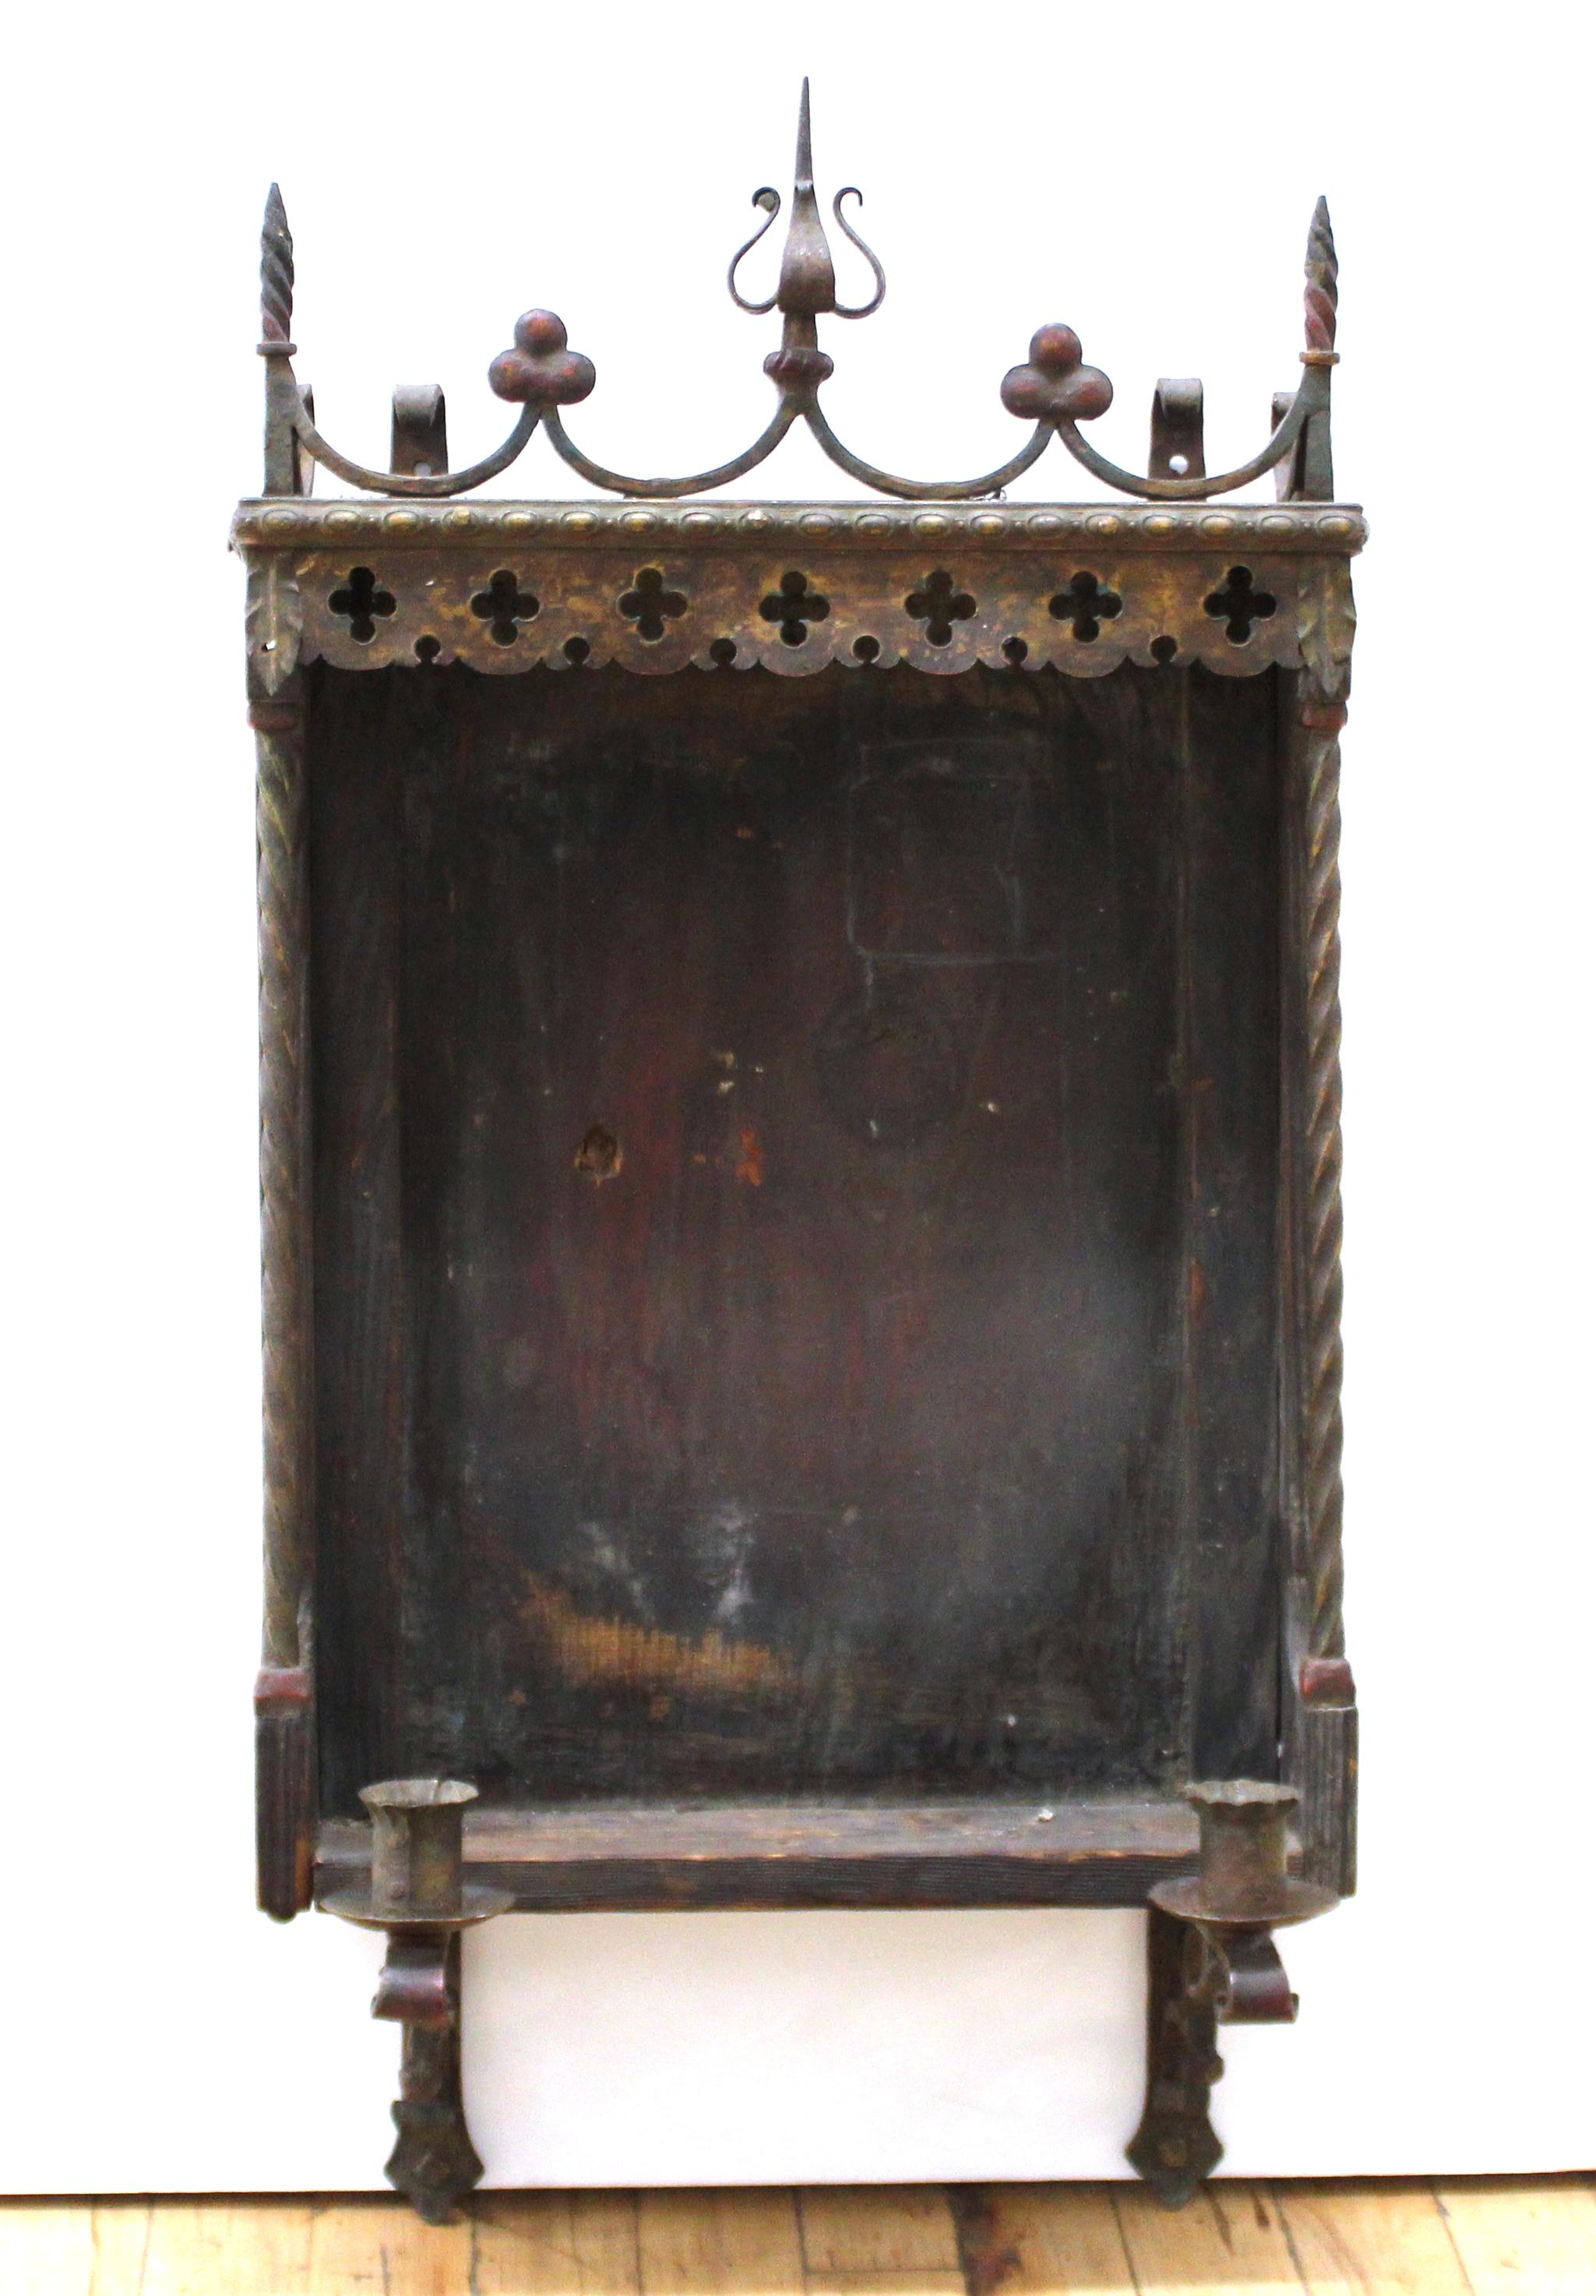 Spanish Gothic Revival wooden wall-mounted niche frame or altar with ornamental wrought iron elements and a pair of candle sconces. The piece can be used to house a painting or a mirror. Handmade in Spain during the mid-19th century.